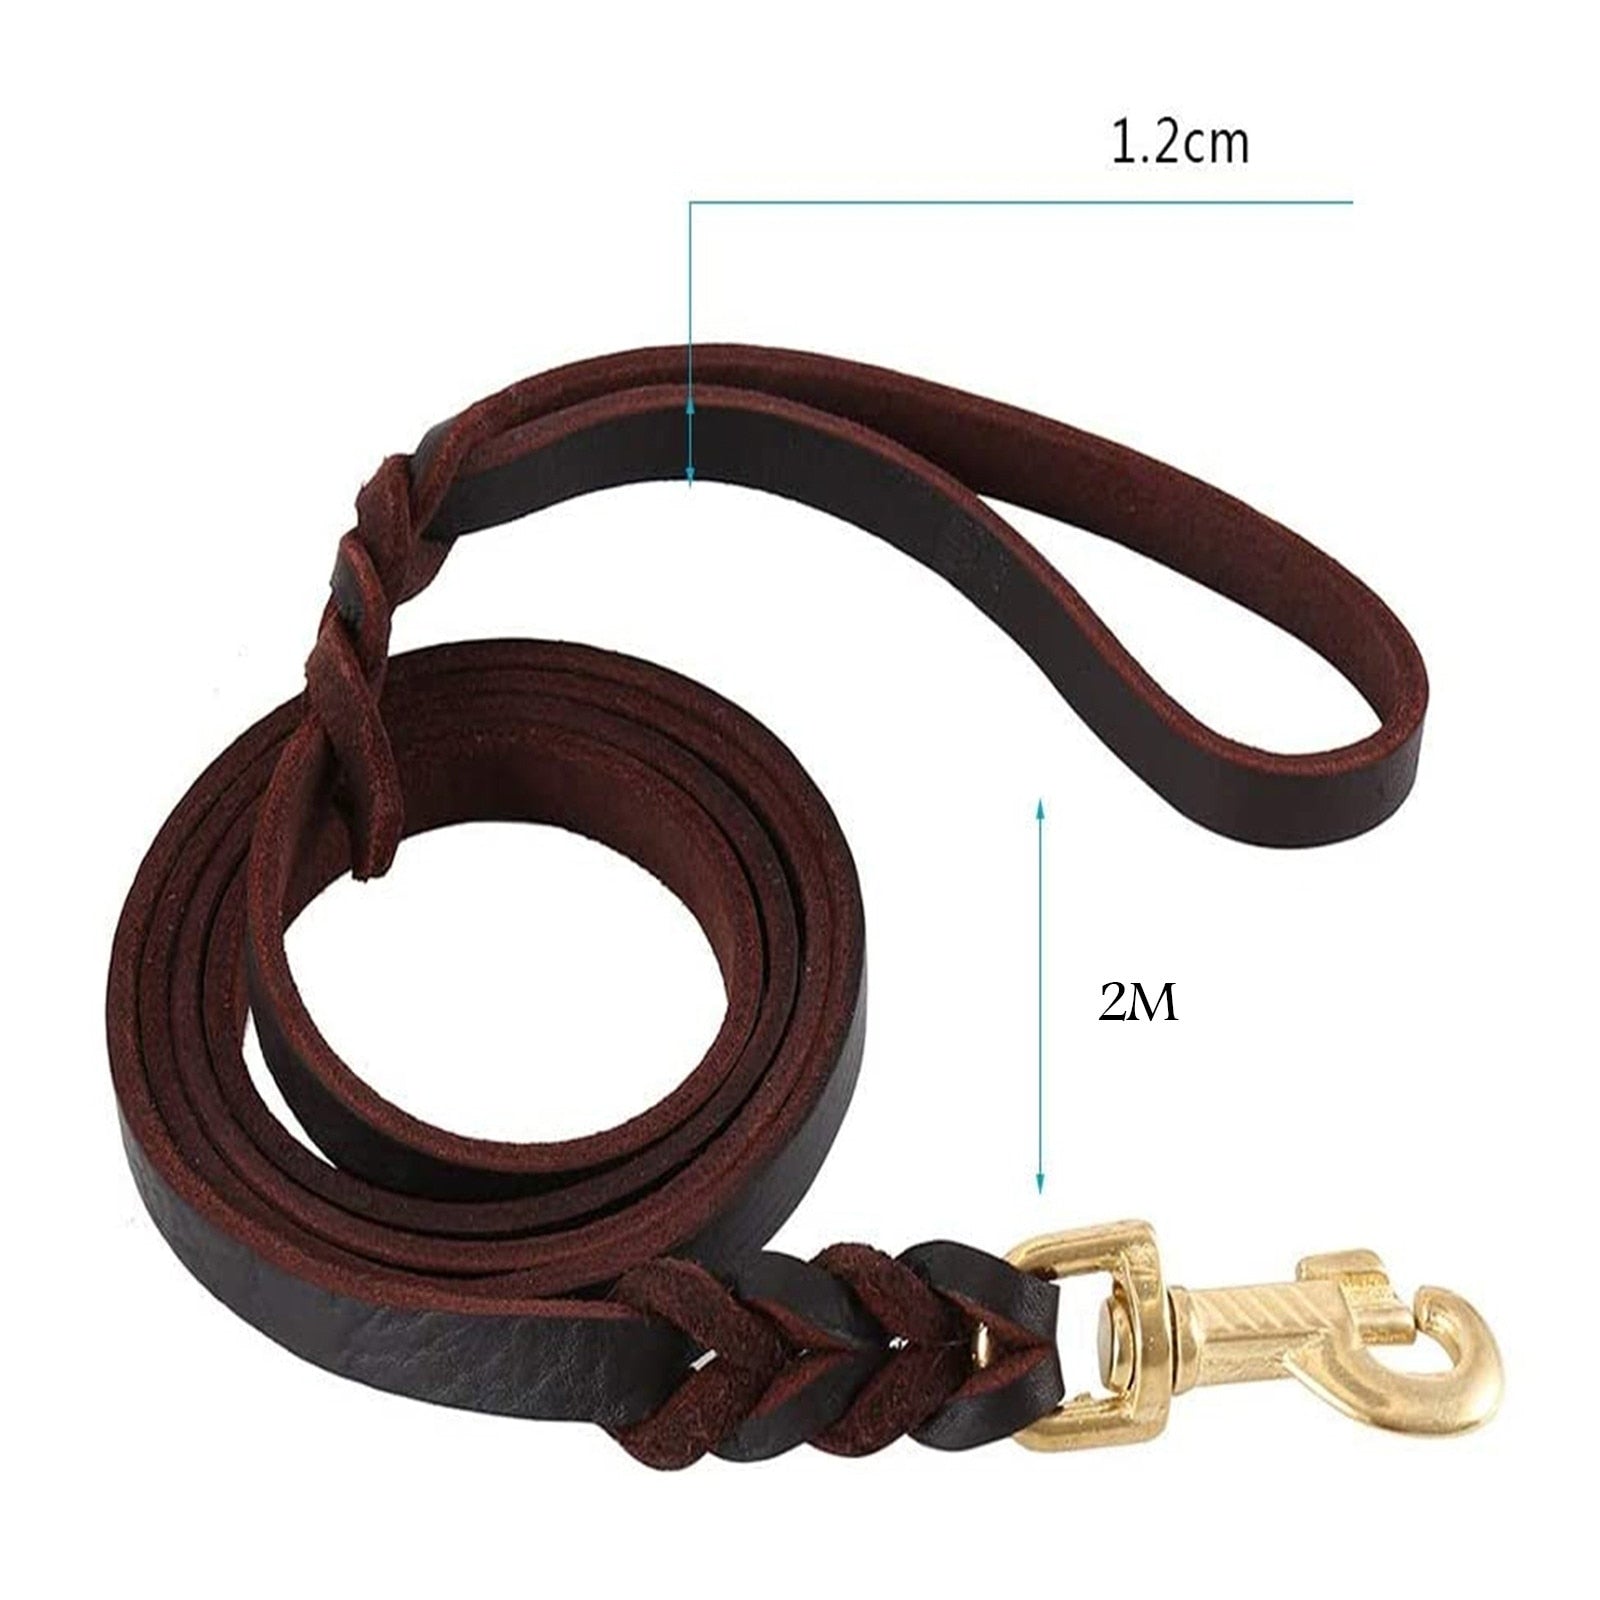 Military Grade Heavy Duty Leash - Safe Items For Pets